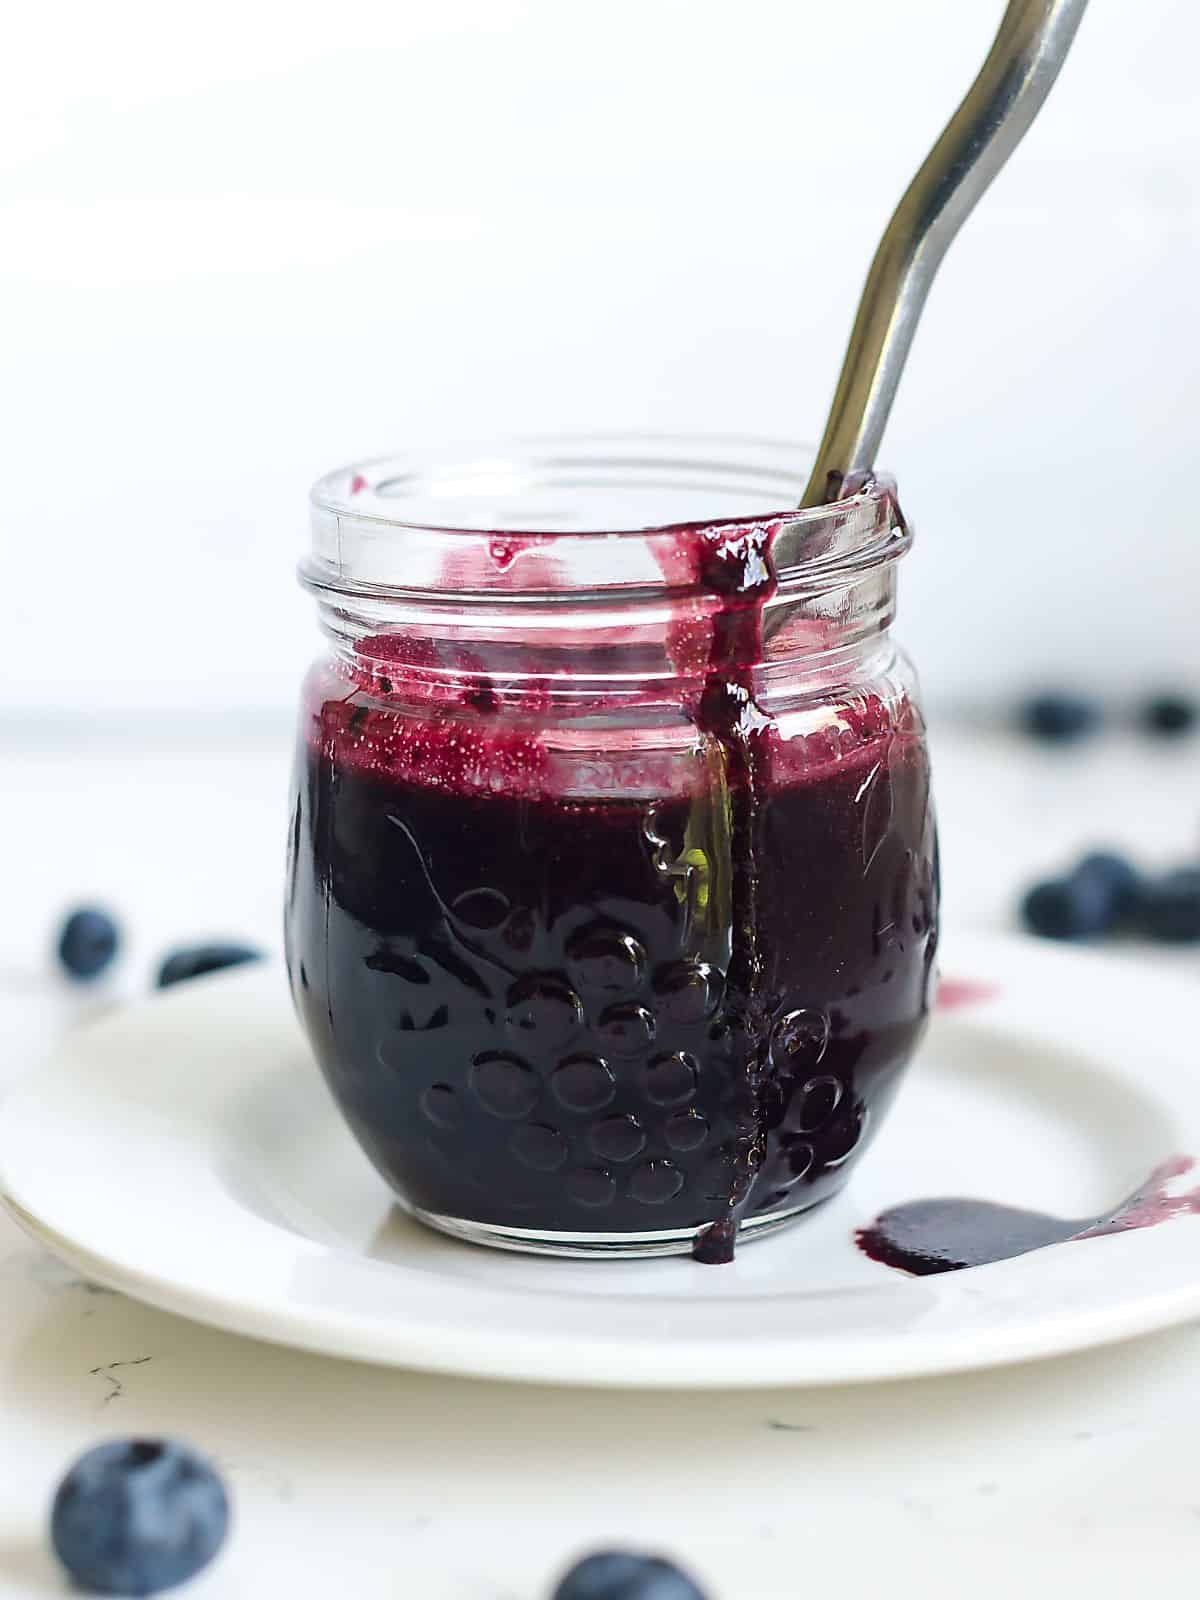 Blueberry Balsamic Vinaigrette Dressing in a glass jar with a spoon